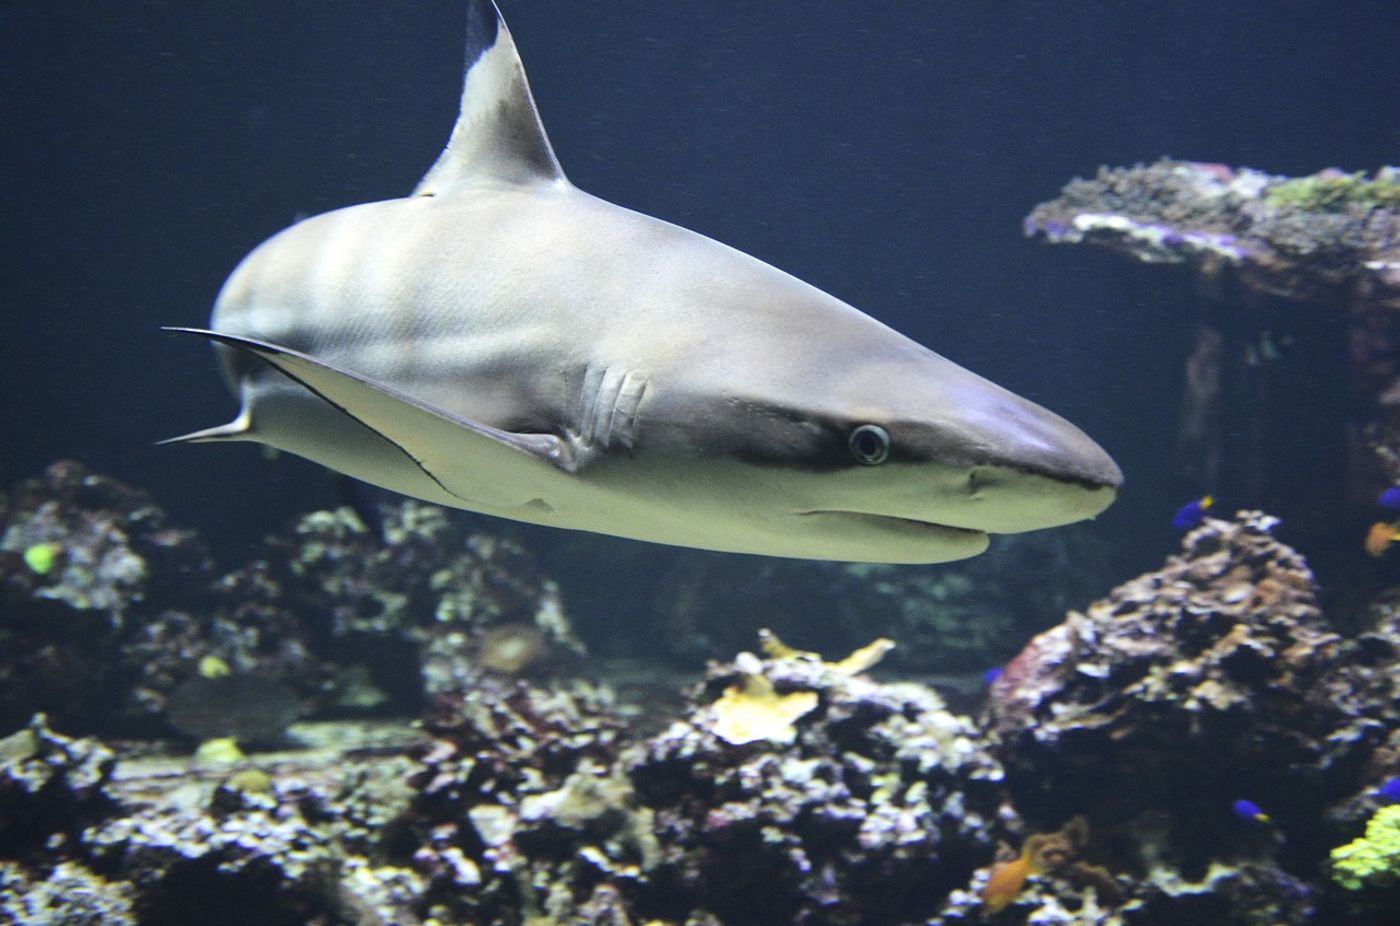 Conservation efforts of sharks are threatened by a practice called "finning," but new laws may threaten conservation efforts, scientists argue.